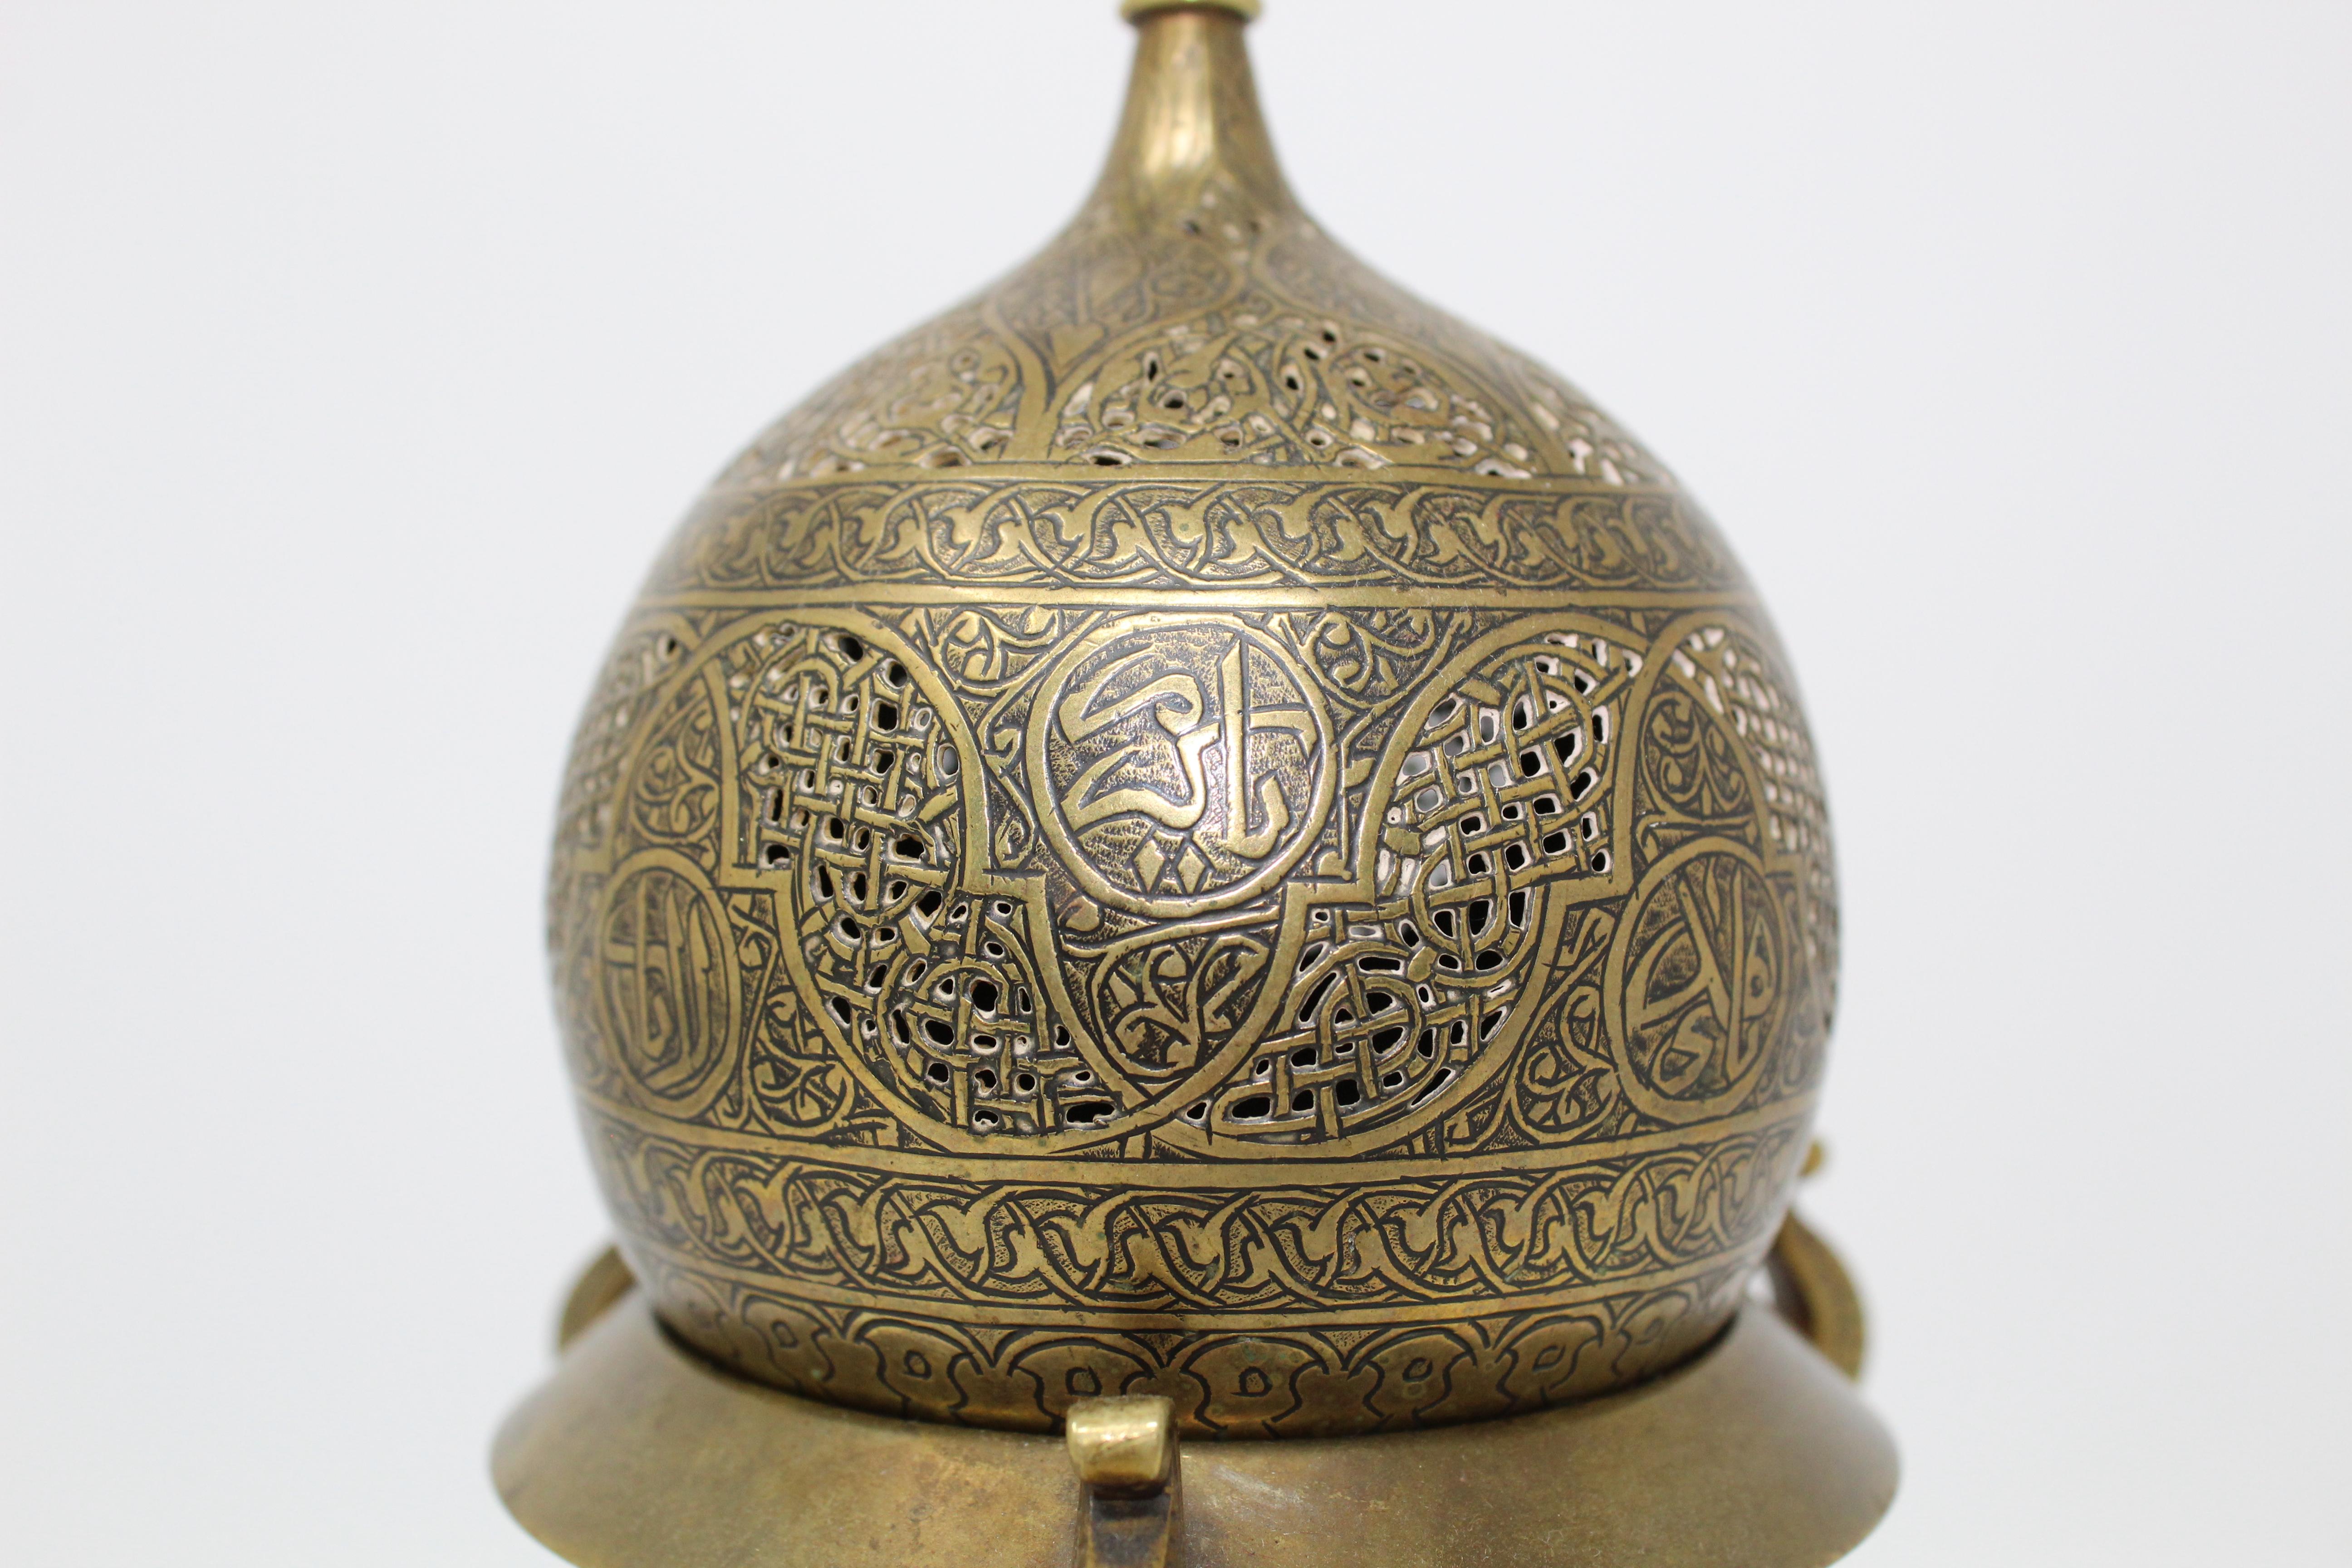 Resting on three feet, the tripod connected by three bars held by a sphere. Stylised vegetal motifs embellish the legs, where they meet the body of the censer, itself plain but for a silver inlaid band, engraved with an interlocking pattern. The